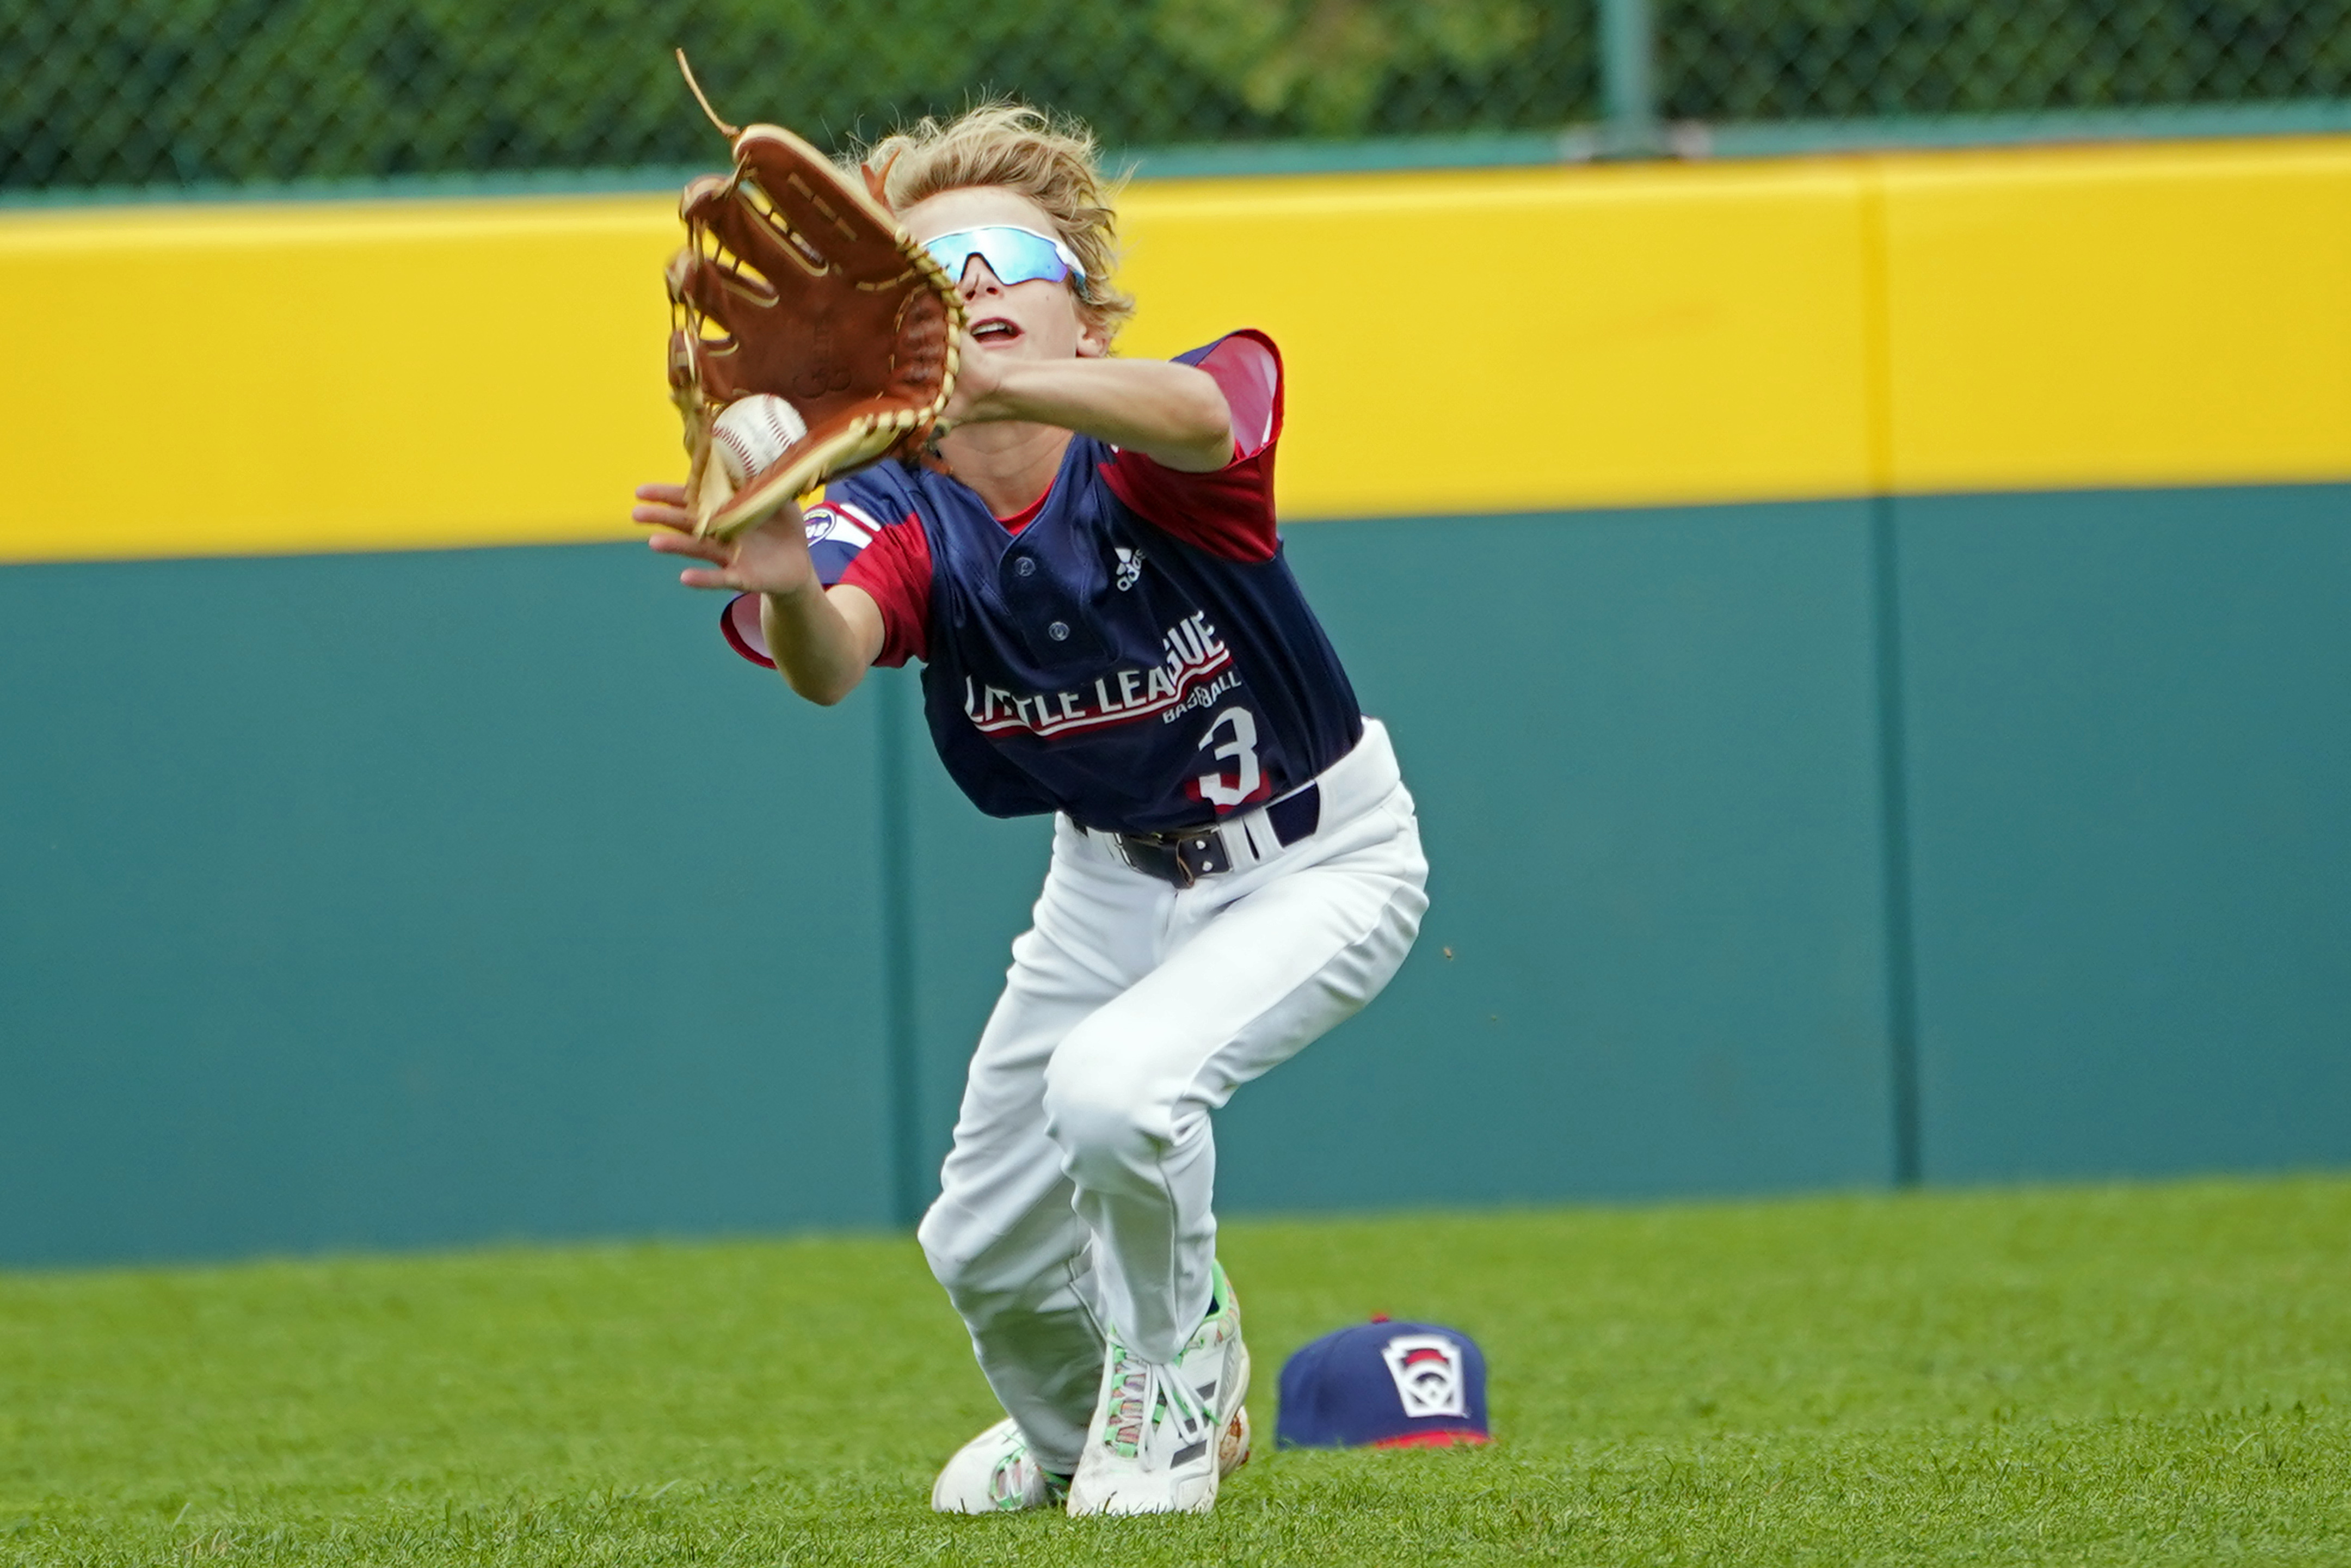 Toms River East eliminated from Little League World Series